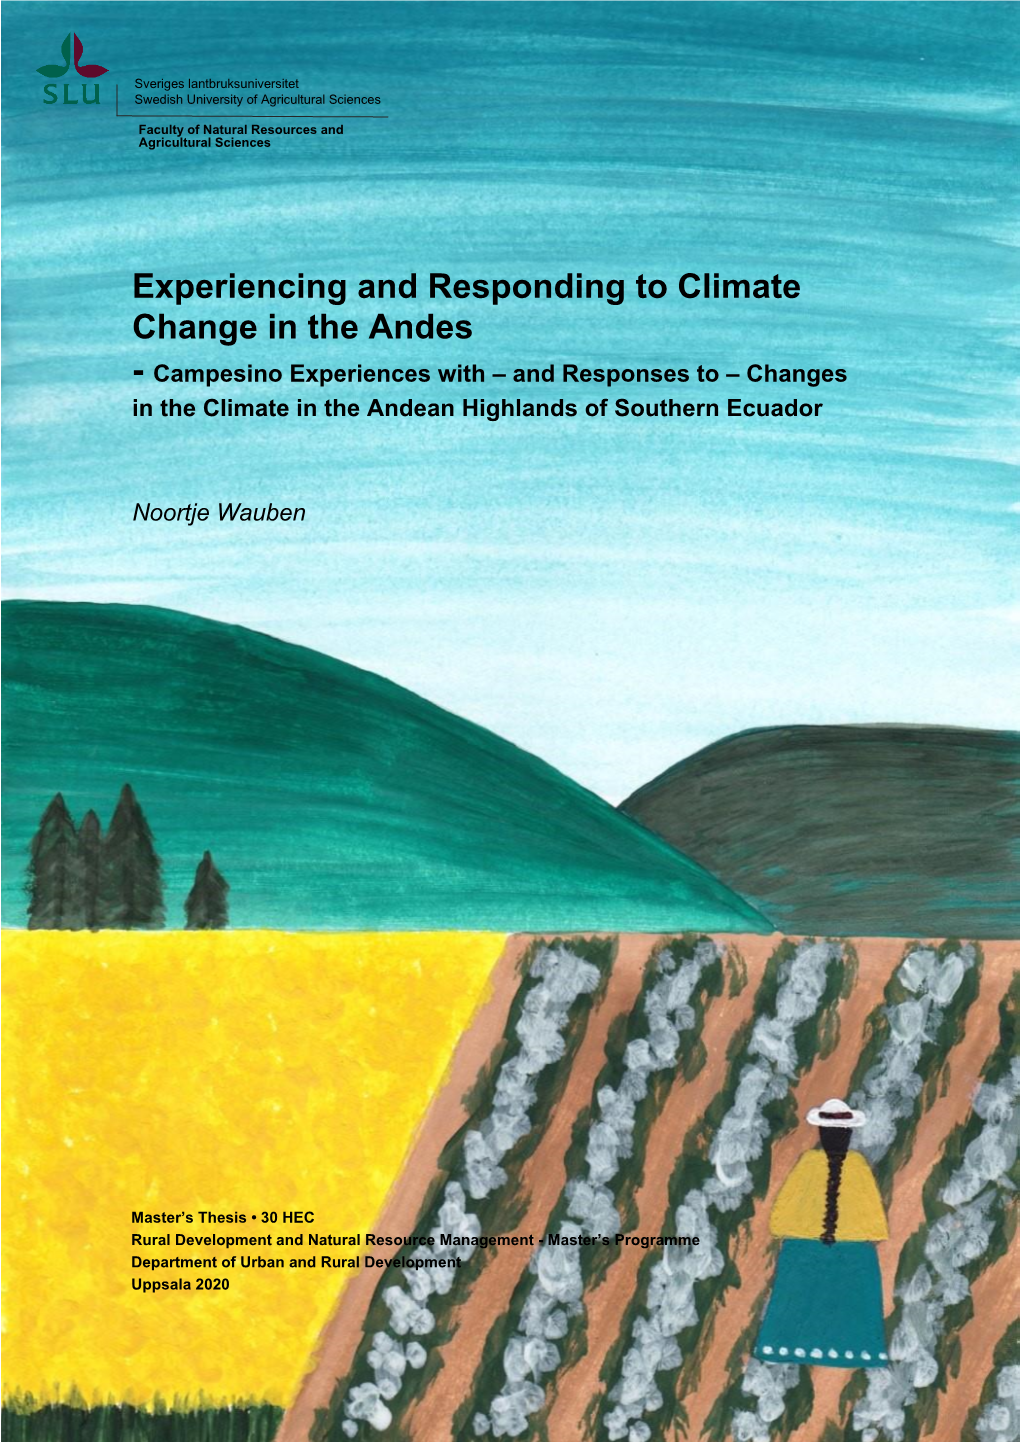 Experiencing and Responding to Climate Change in the Andes